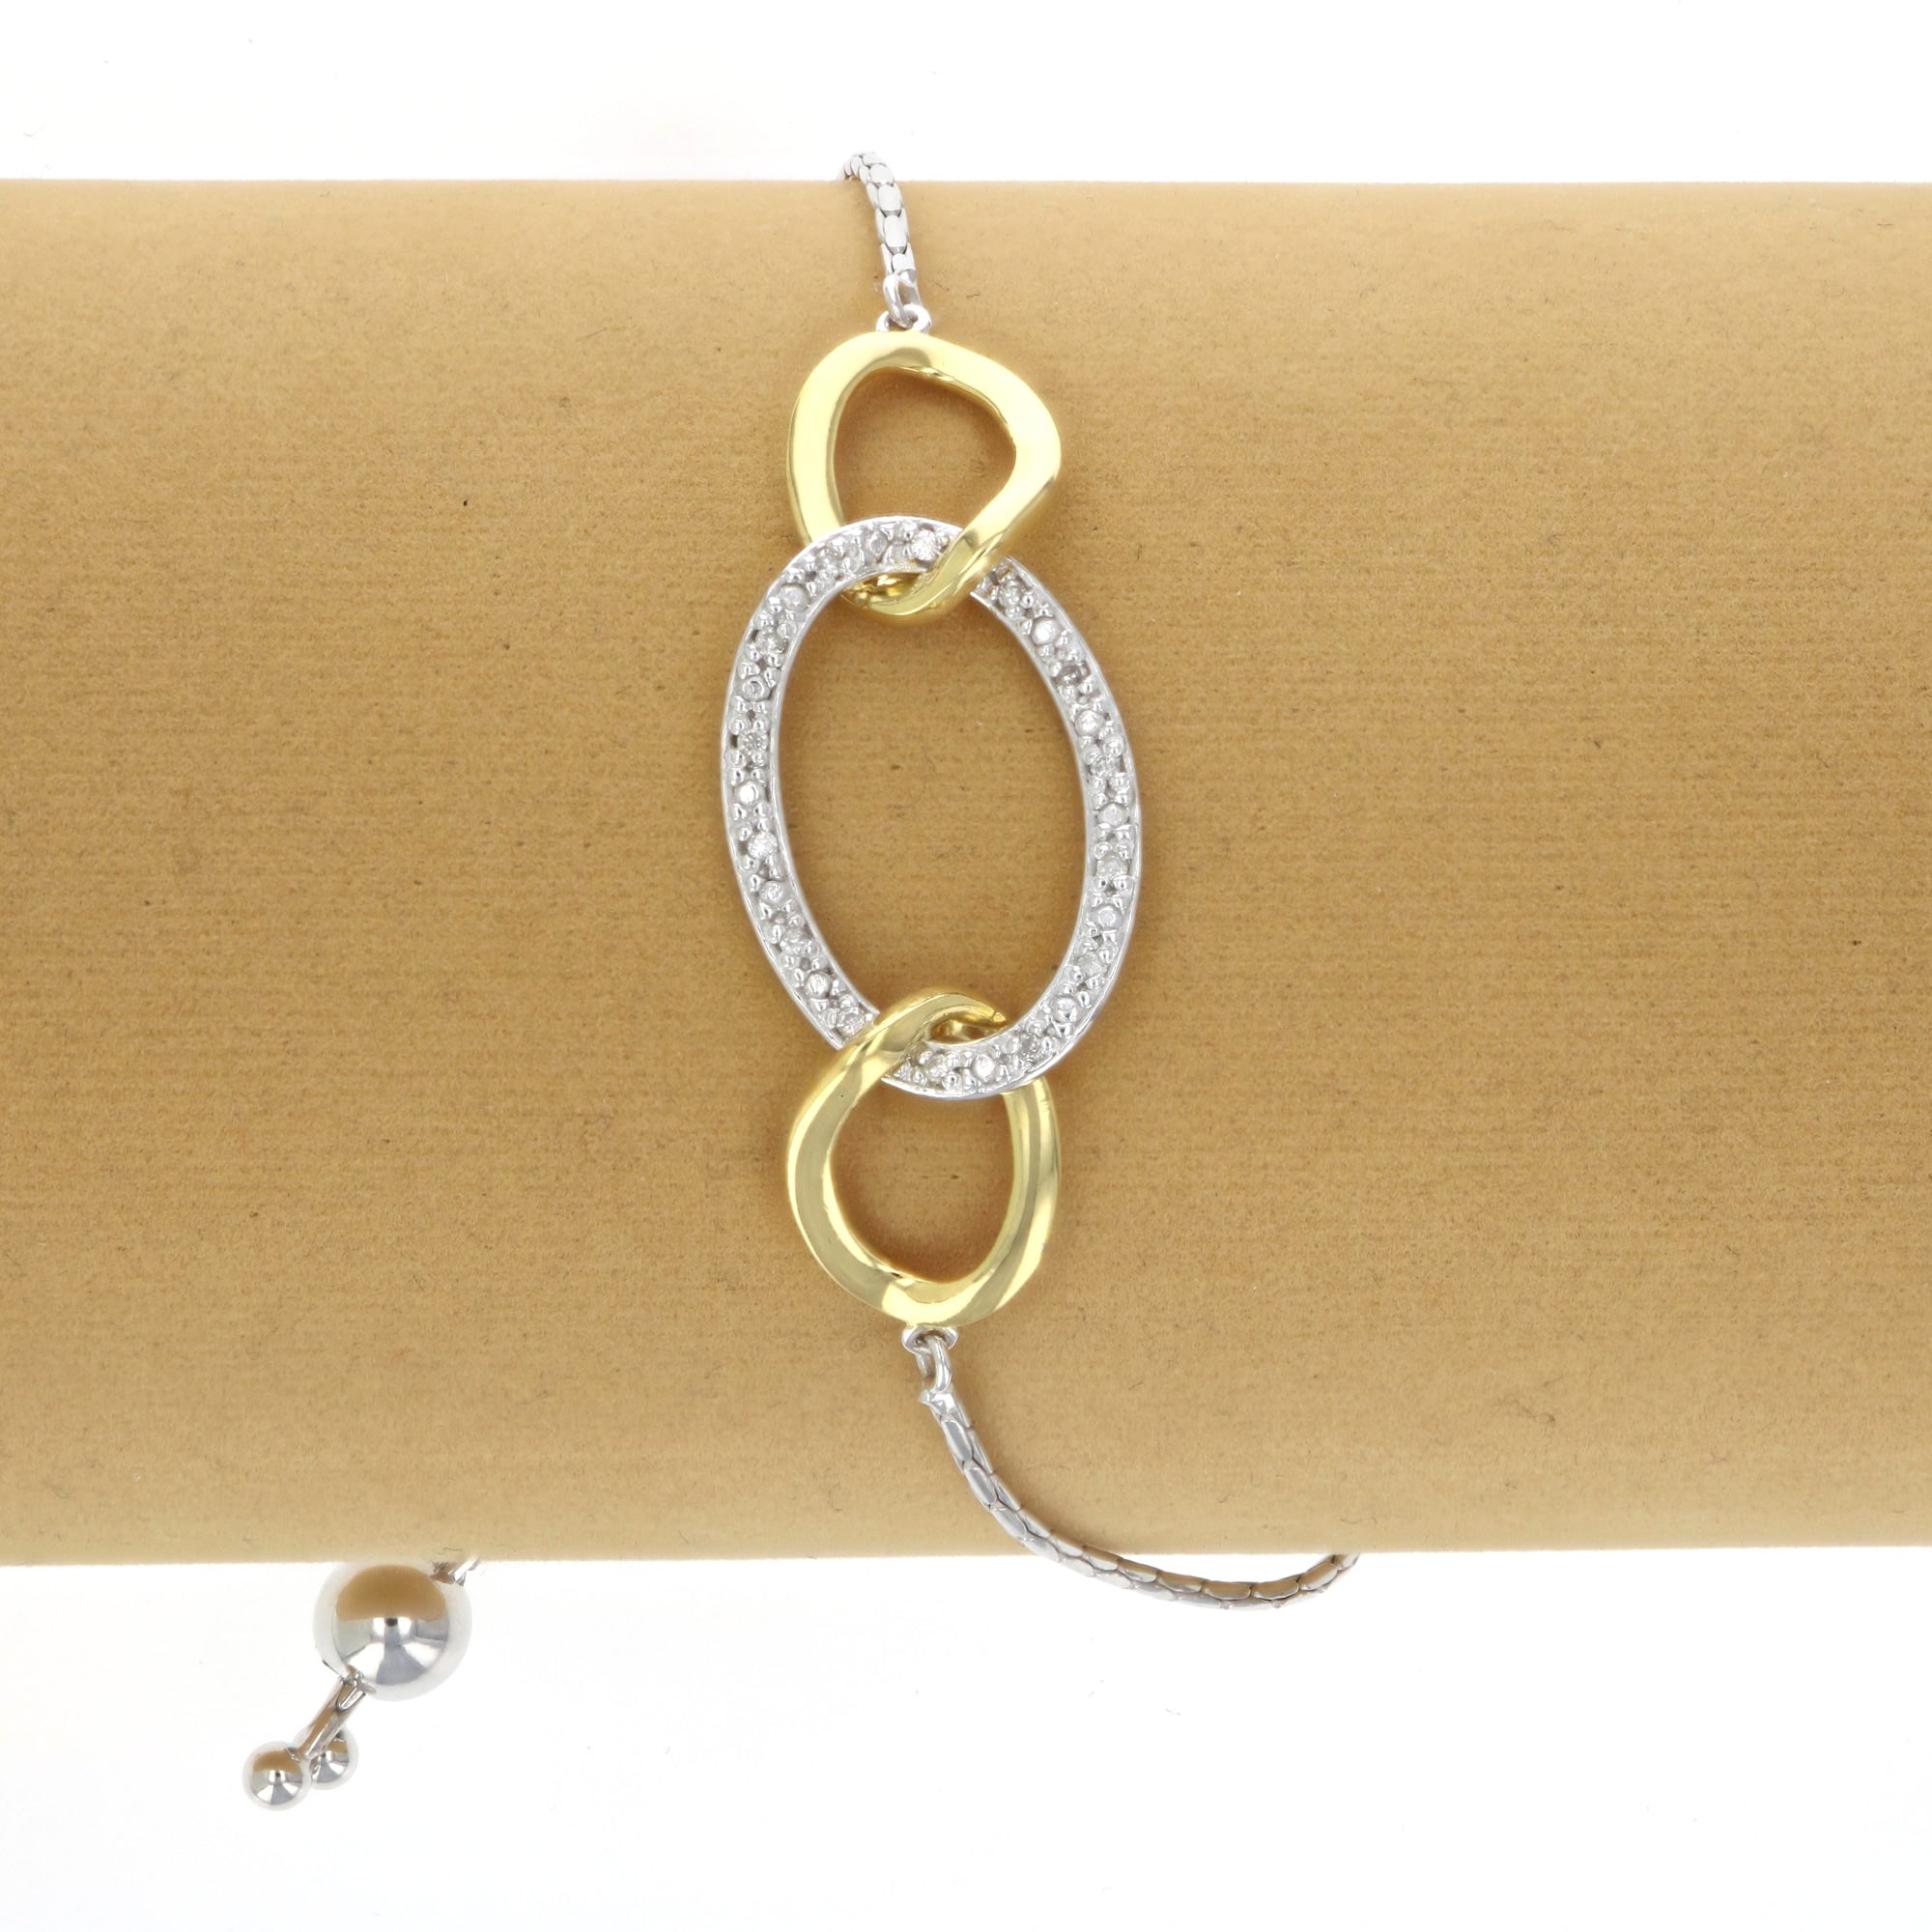 1/10 cttw Diamond Bolo Bracelet Yellow Gold Plated over Sterling Silver Circles